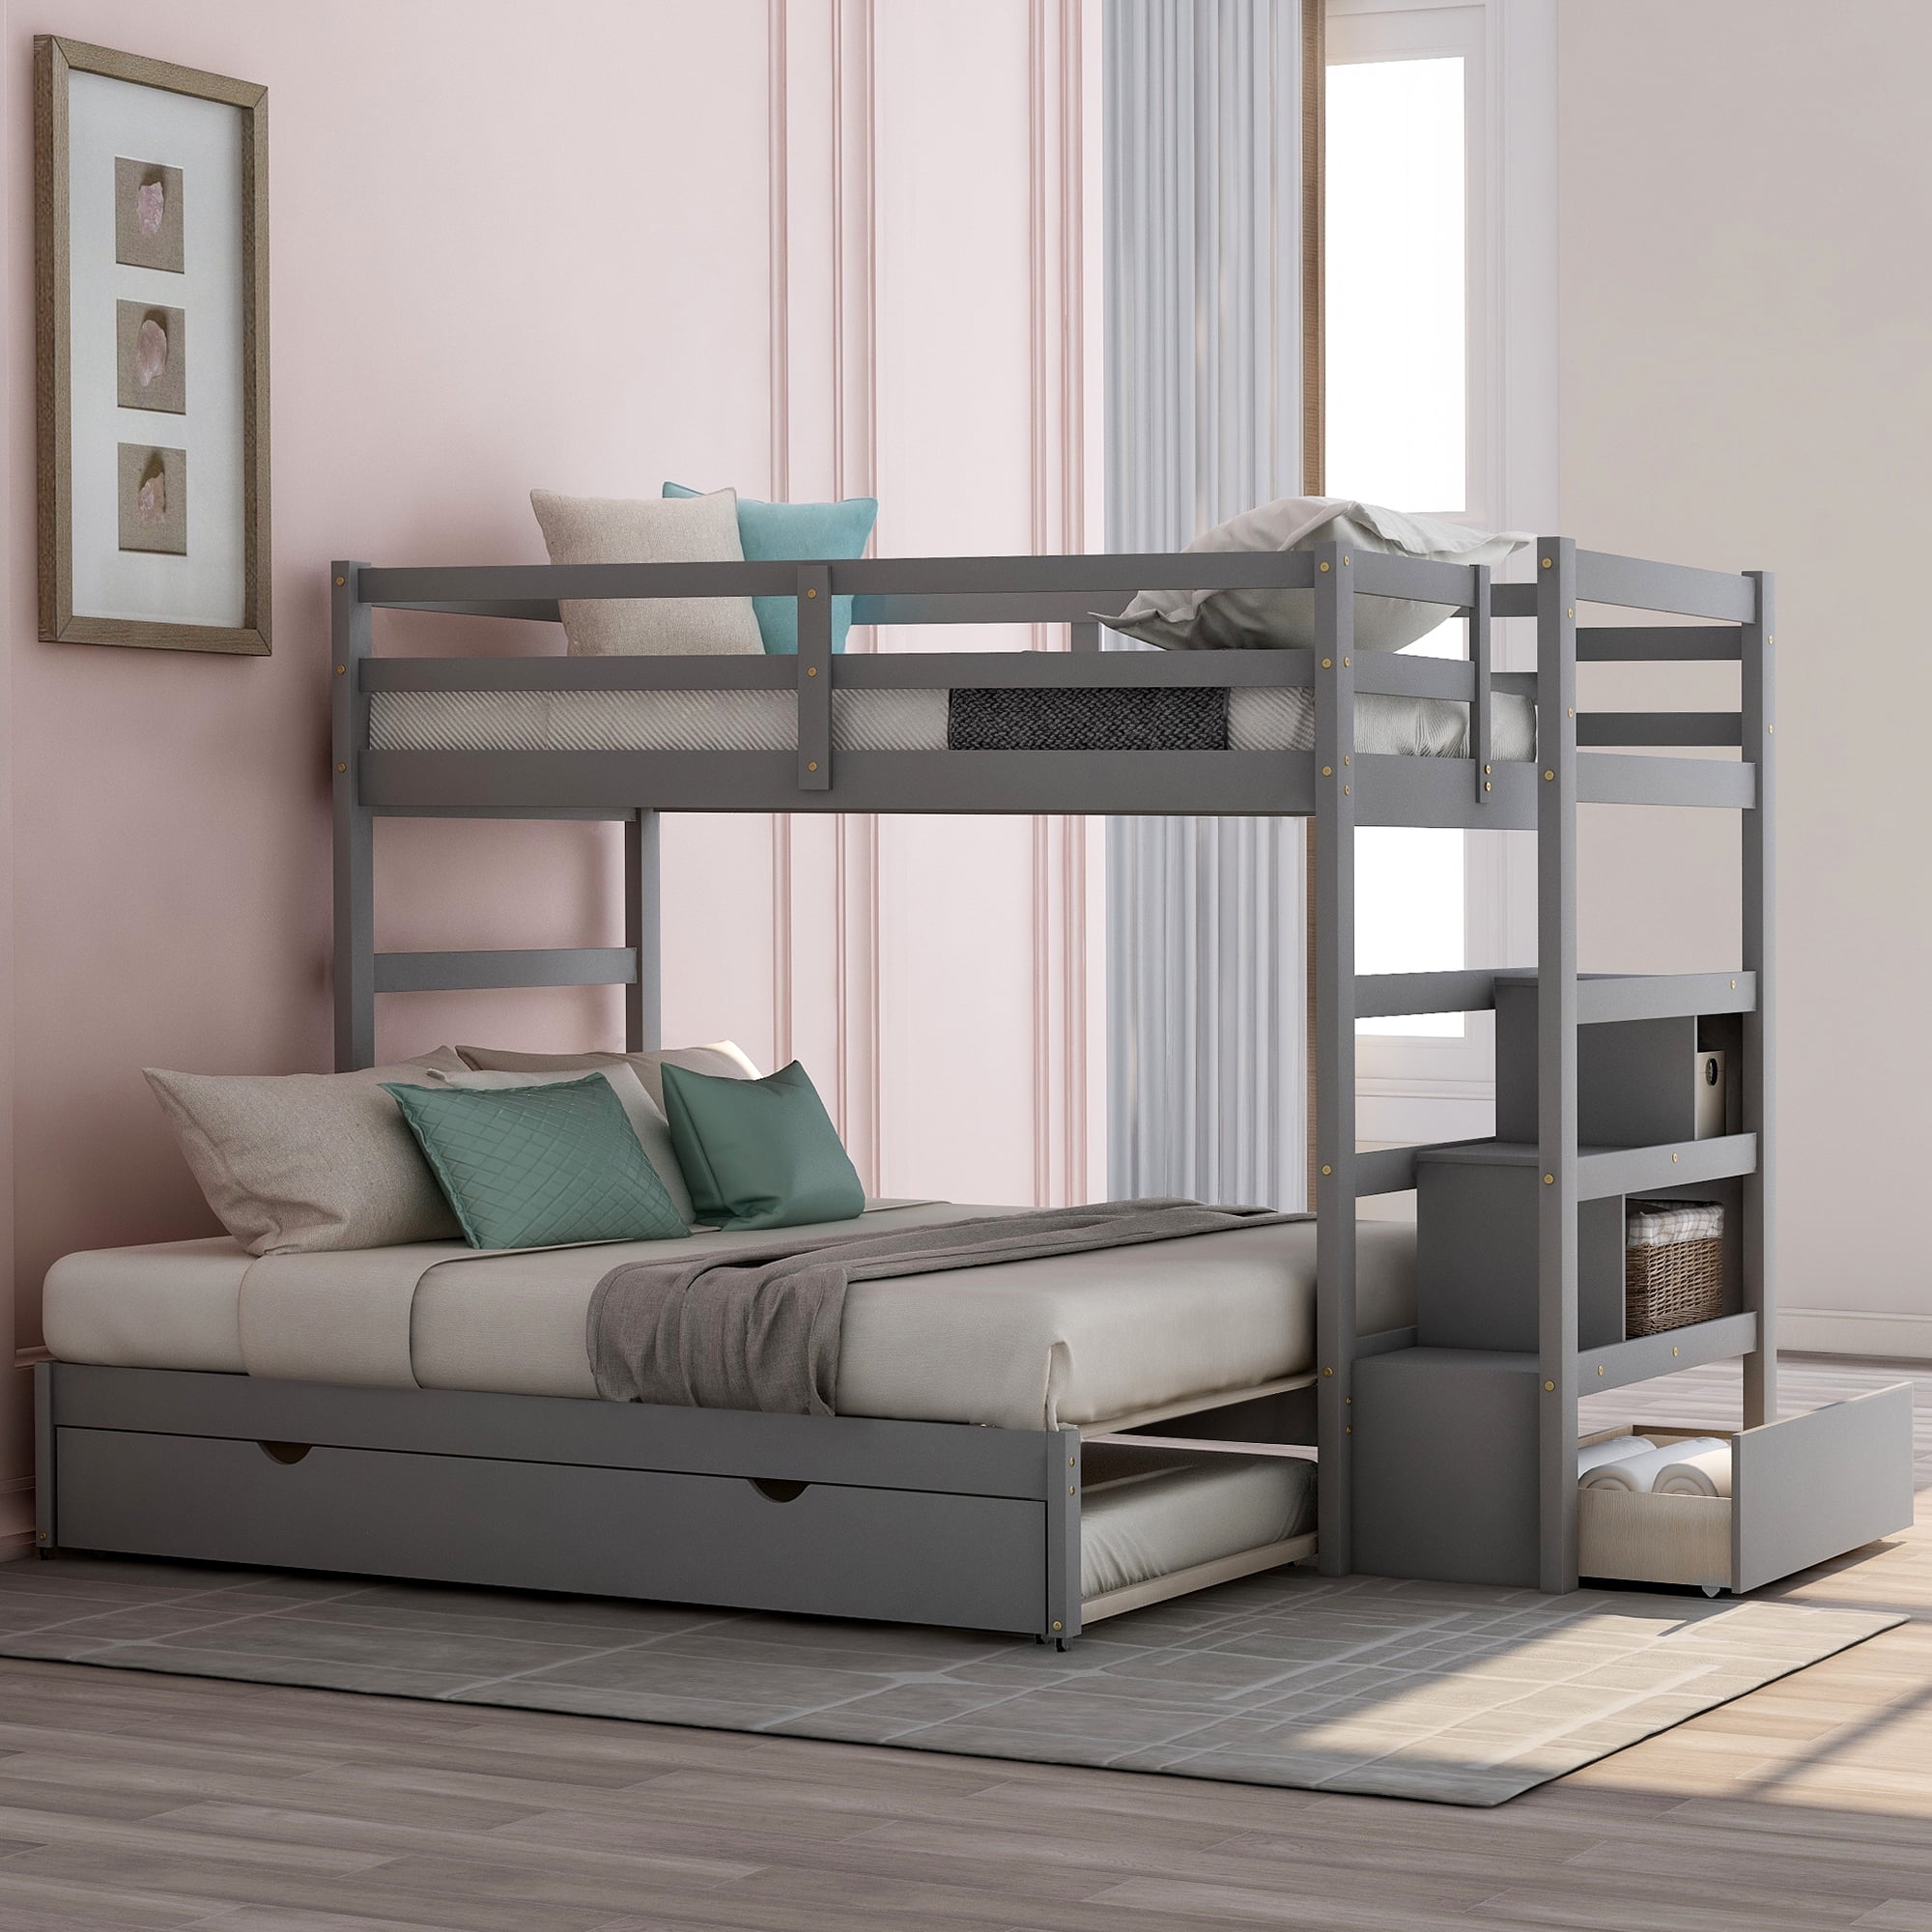 Jumper Twin Over King Bunk Bed With, Detachable Twin Bunk Beds